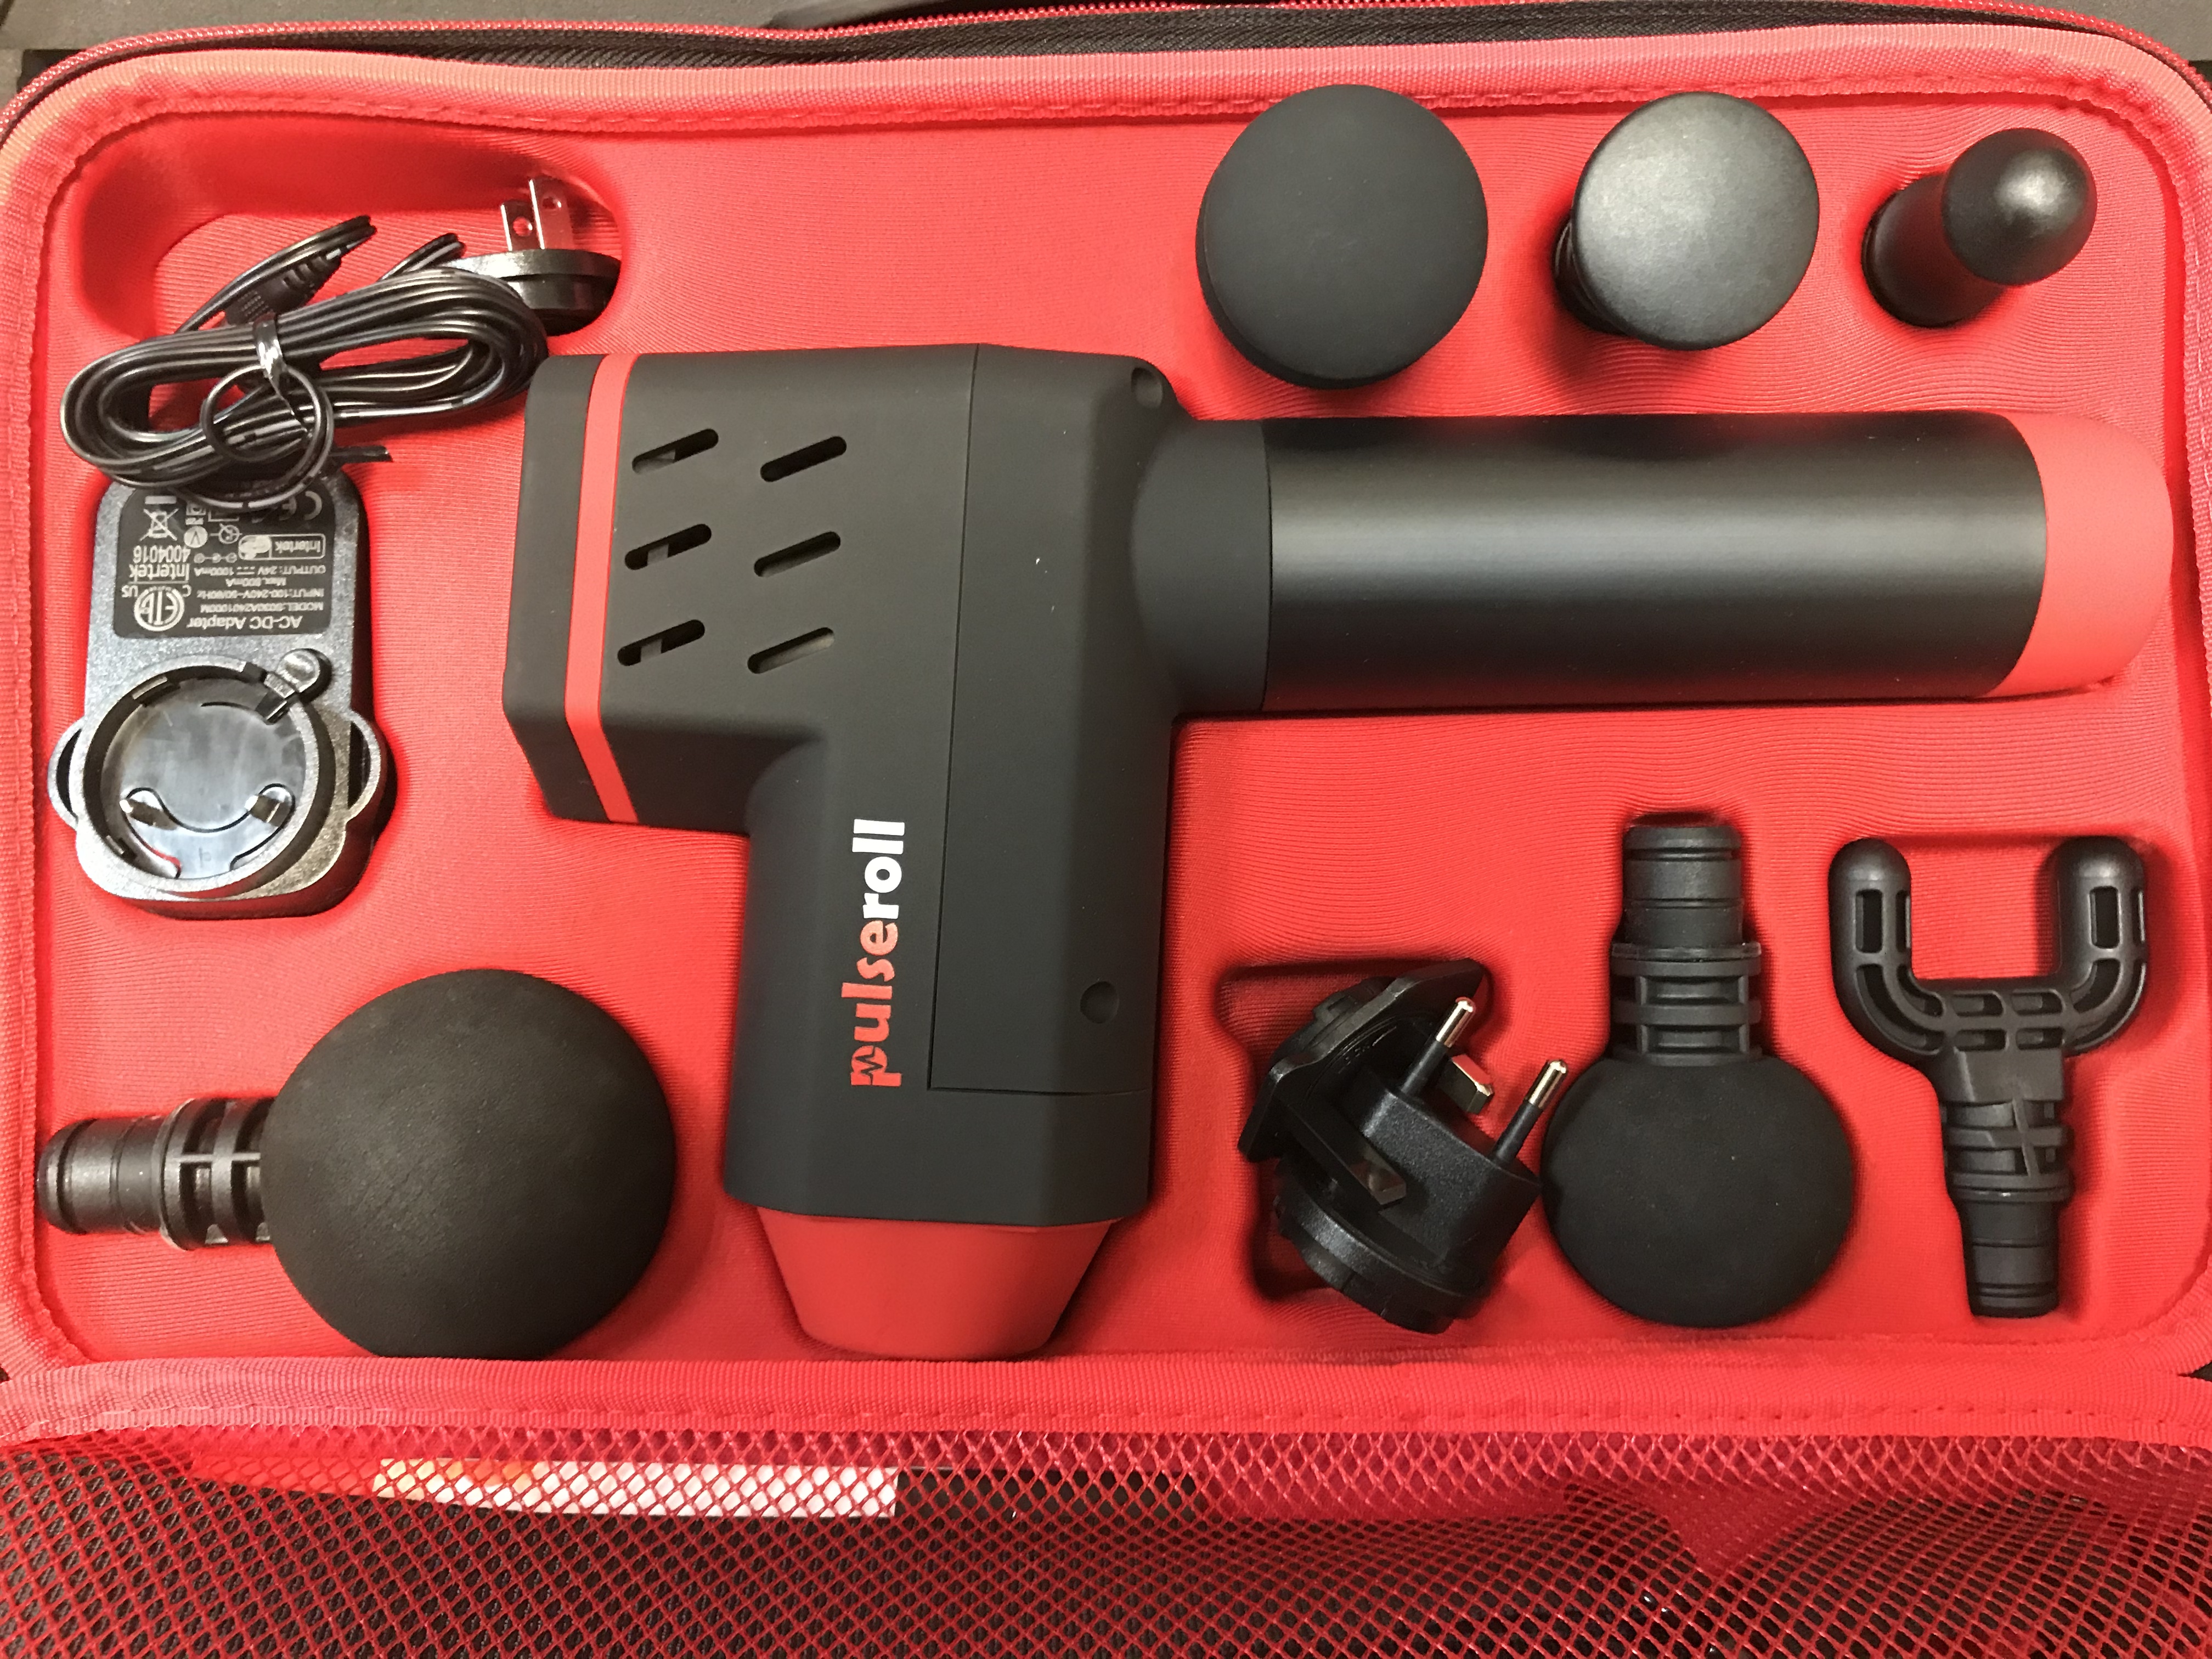 Pulseroll Percussion Massage Gun Review - the very best in the business